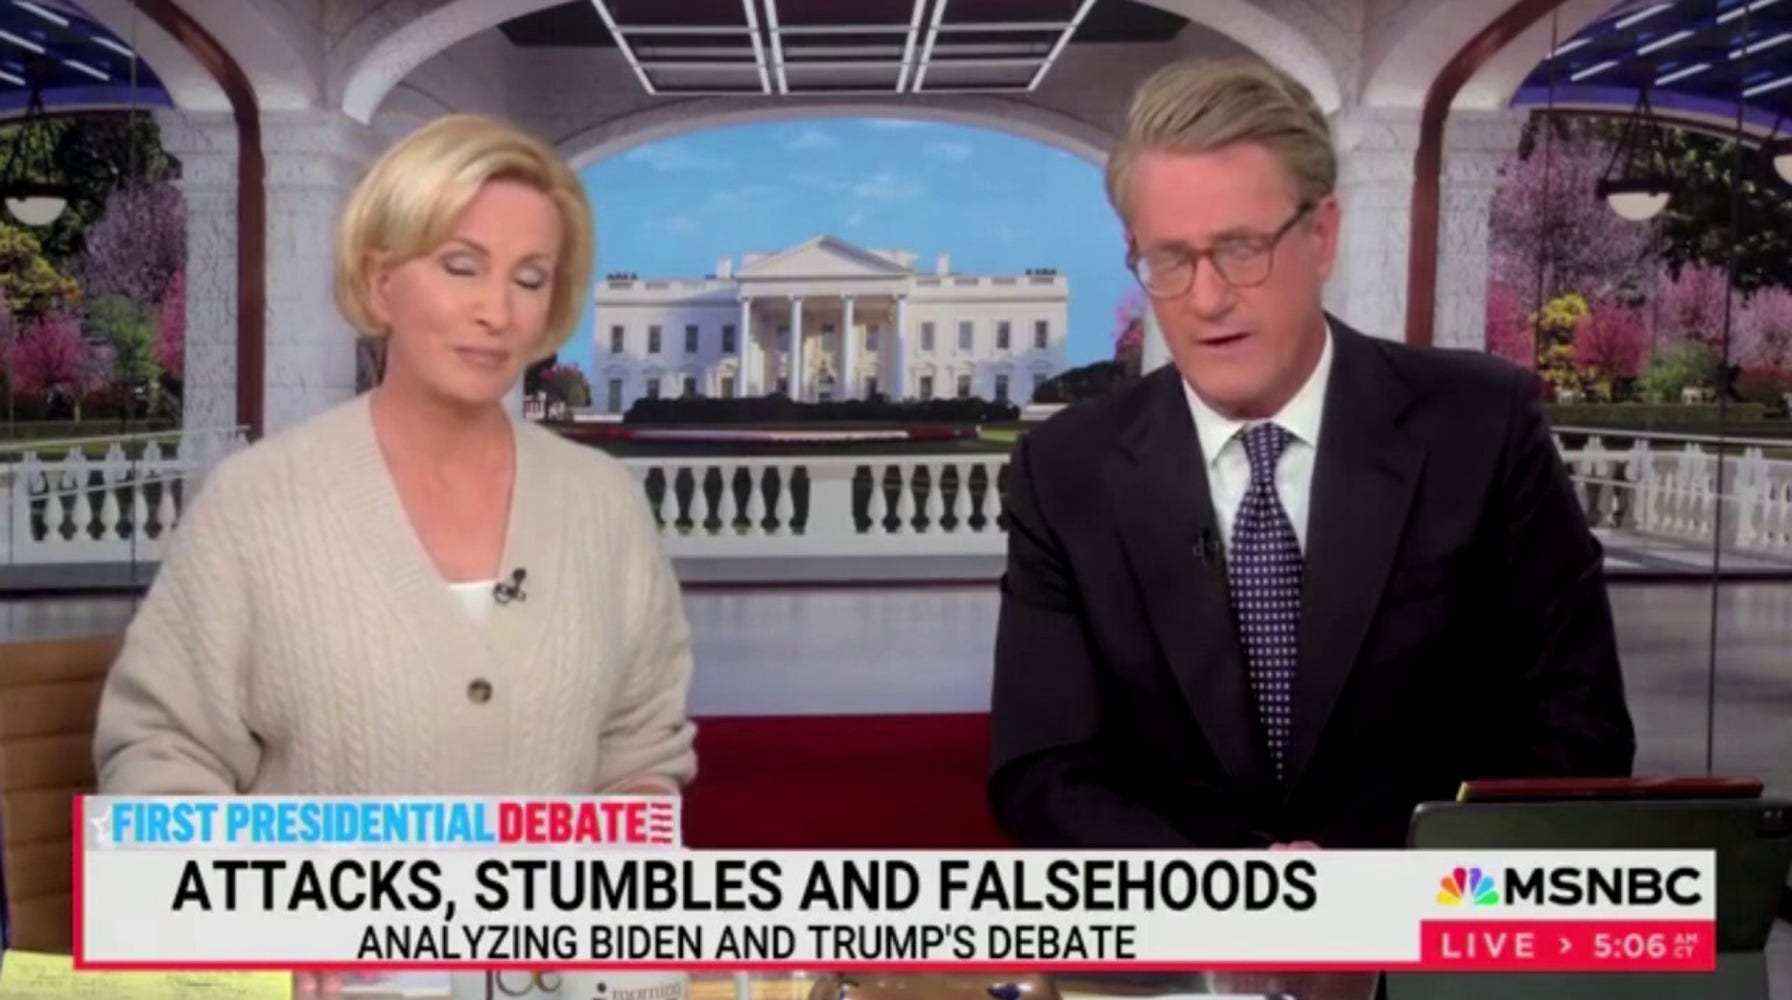 Biden's Debate Performance Raises Questions About Fitness for Re-Election, Says MSNBC's Scarborough